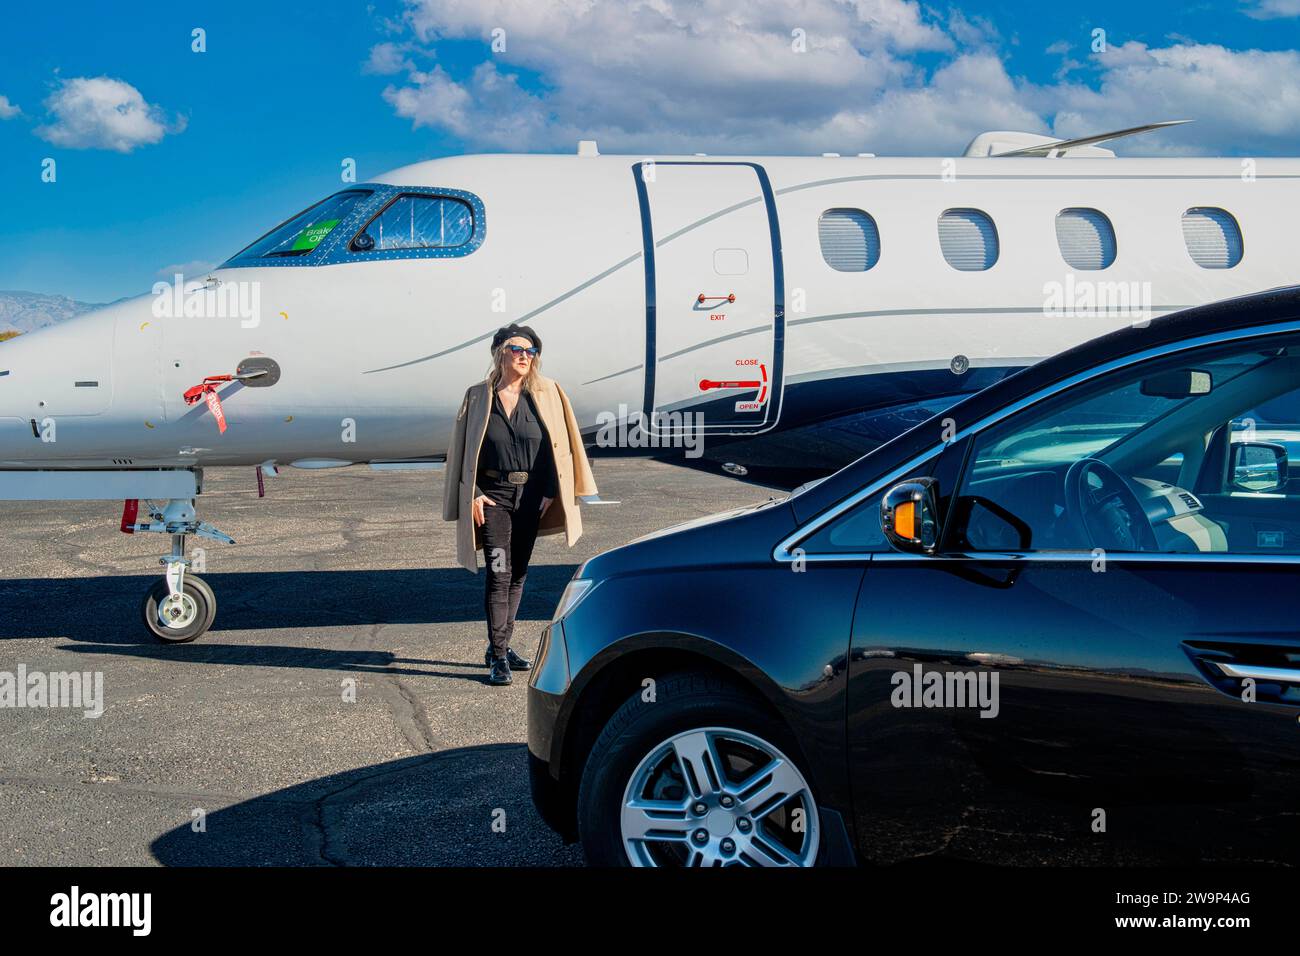 First World problem - VIP person waits outside a locked private jet as the Pilot is late. Stock Photo